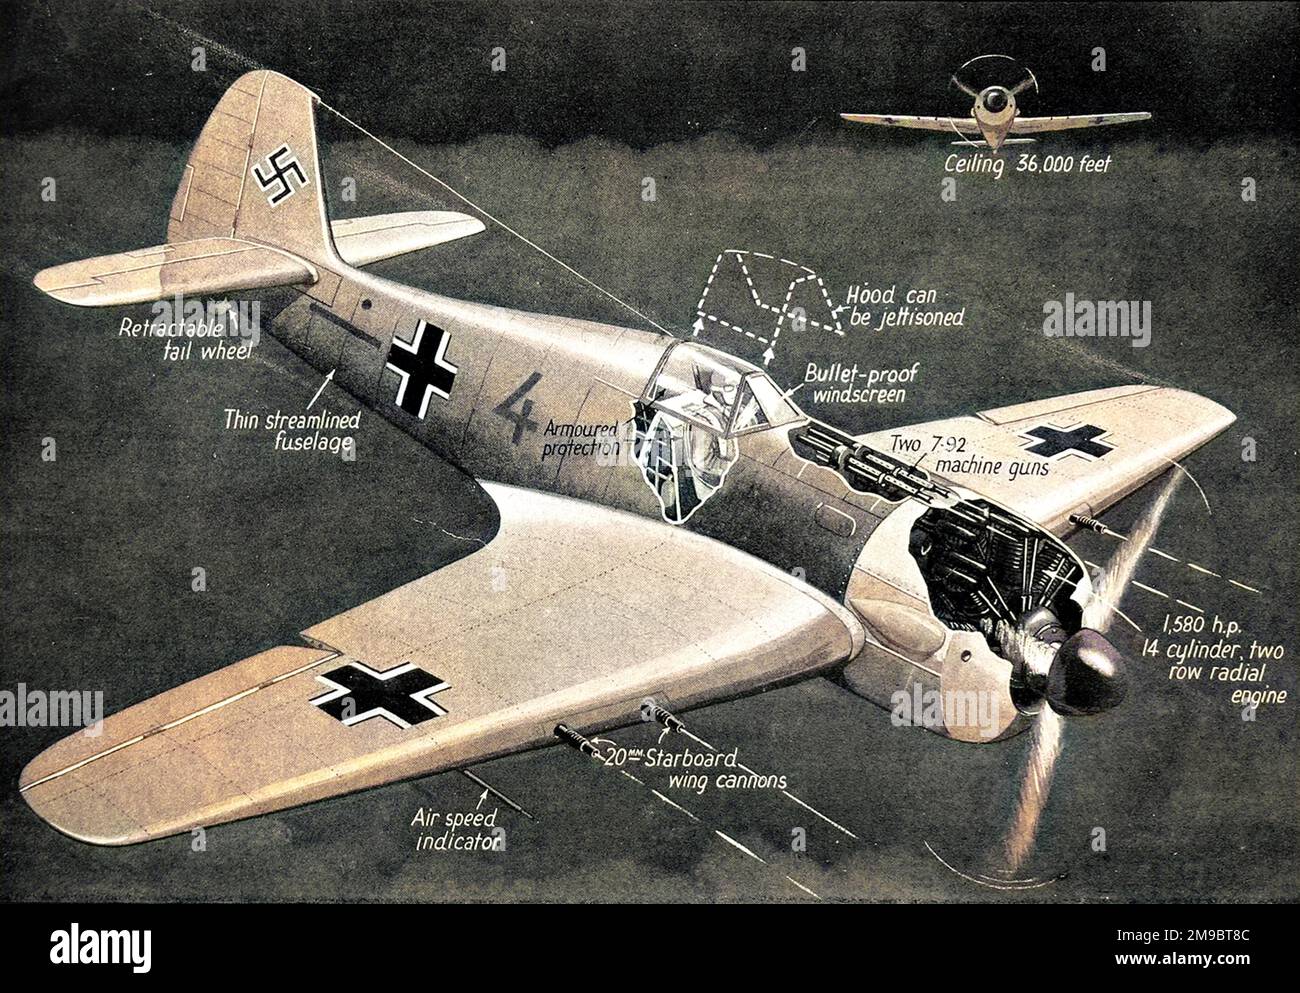 German Focke-Wulf 190 fighter airplane, with cutaways of the engine and machine-guns, August 1942. This image showed some of the features of the latest FW190 captured by British forces. Stock Photo